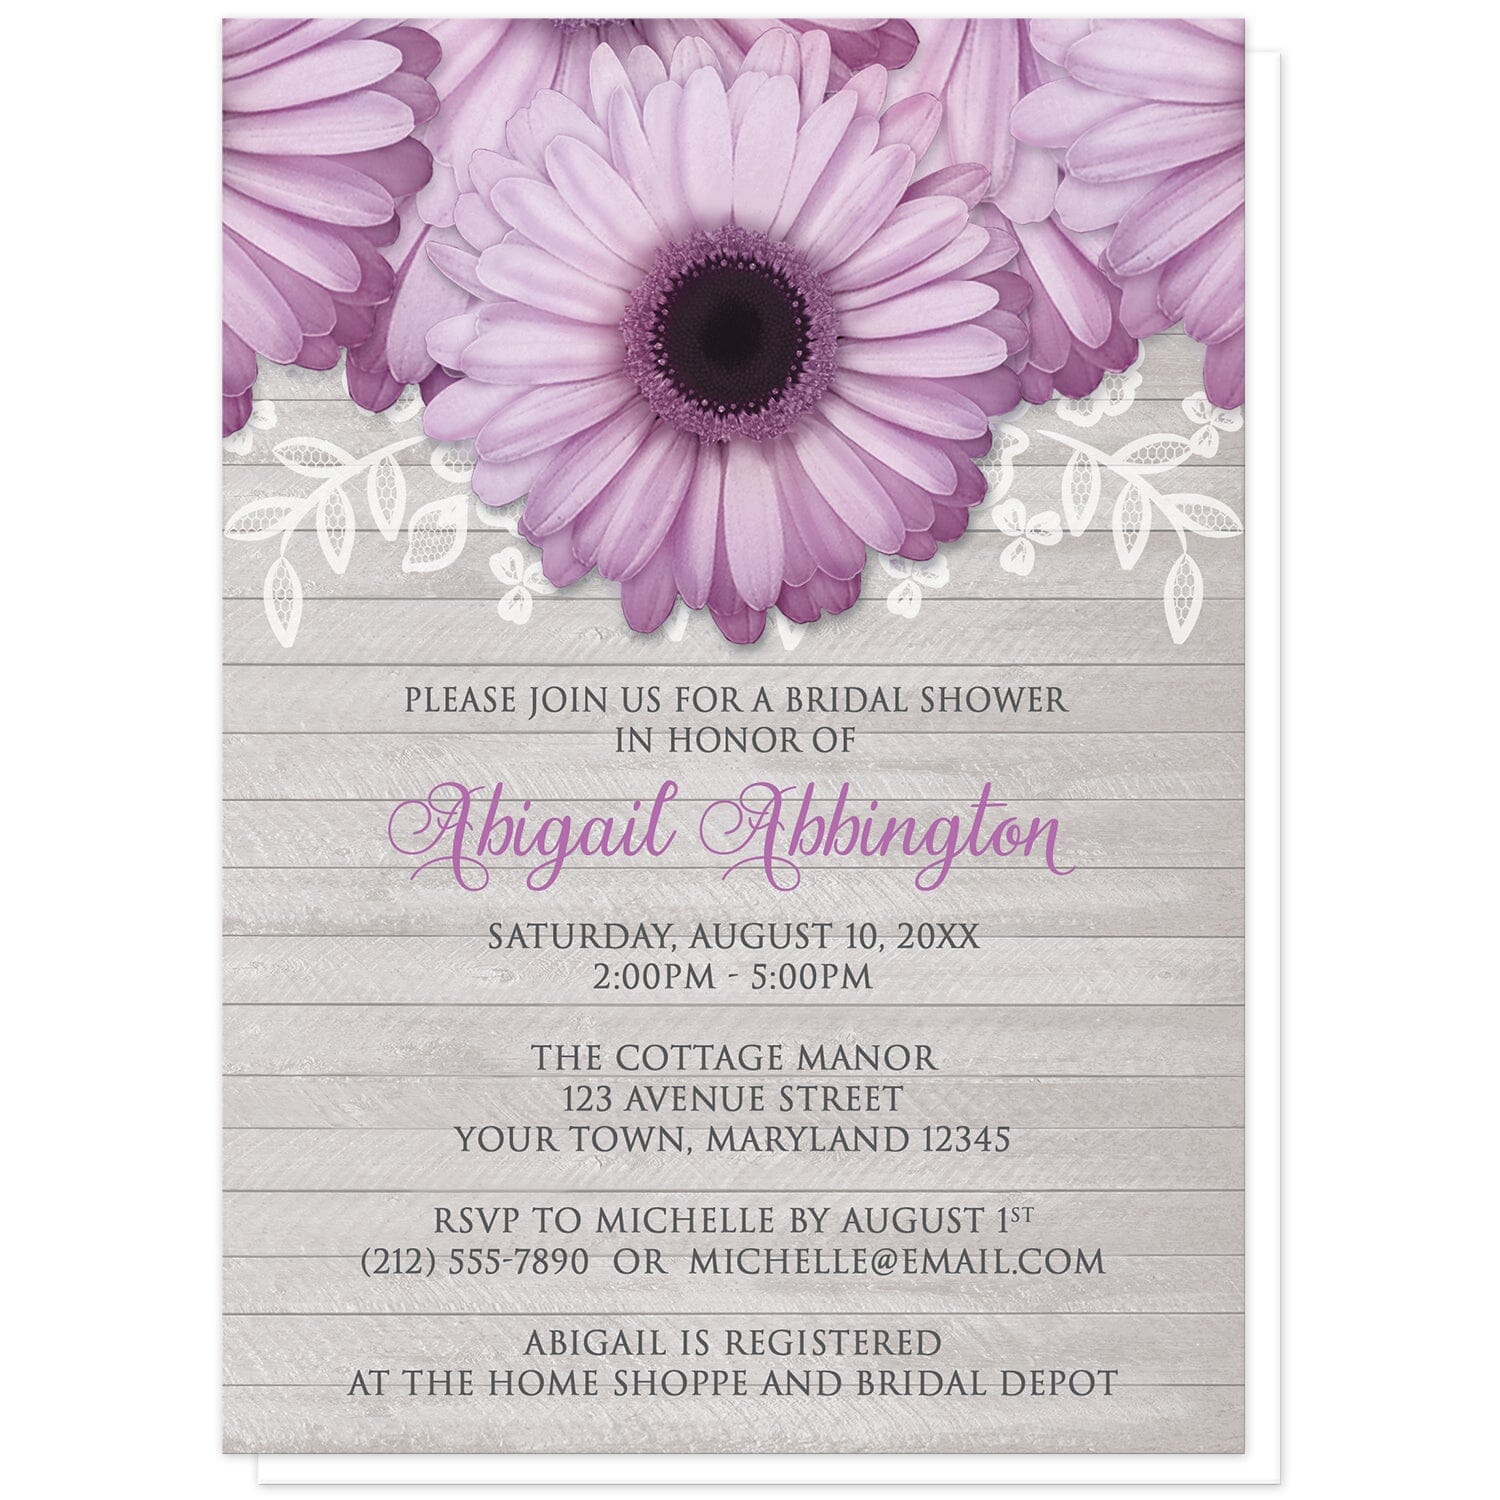 Rustic Purple Daisy Gray Wood Bridal Shower Invitations at Artistically Invited. Rustic purple daisy gray wood bridal shower invitations designed with large and lovely purple daisy flowers with a white lace overlay along the top over a light gray wood background illustration. Your personalized bridal shower celebration details are custom printed in purple and dark gray over the wood background design below the pretty purple daisies.